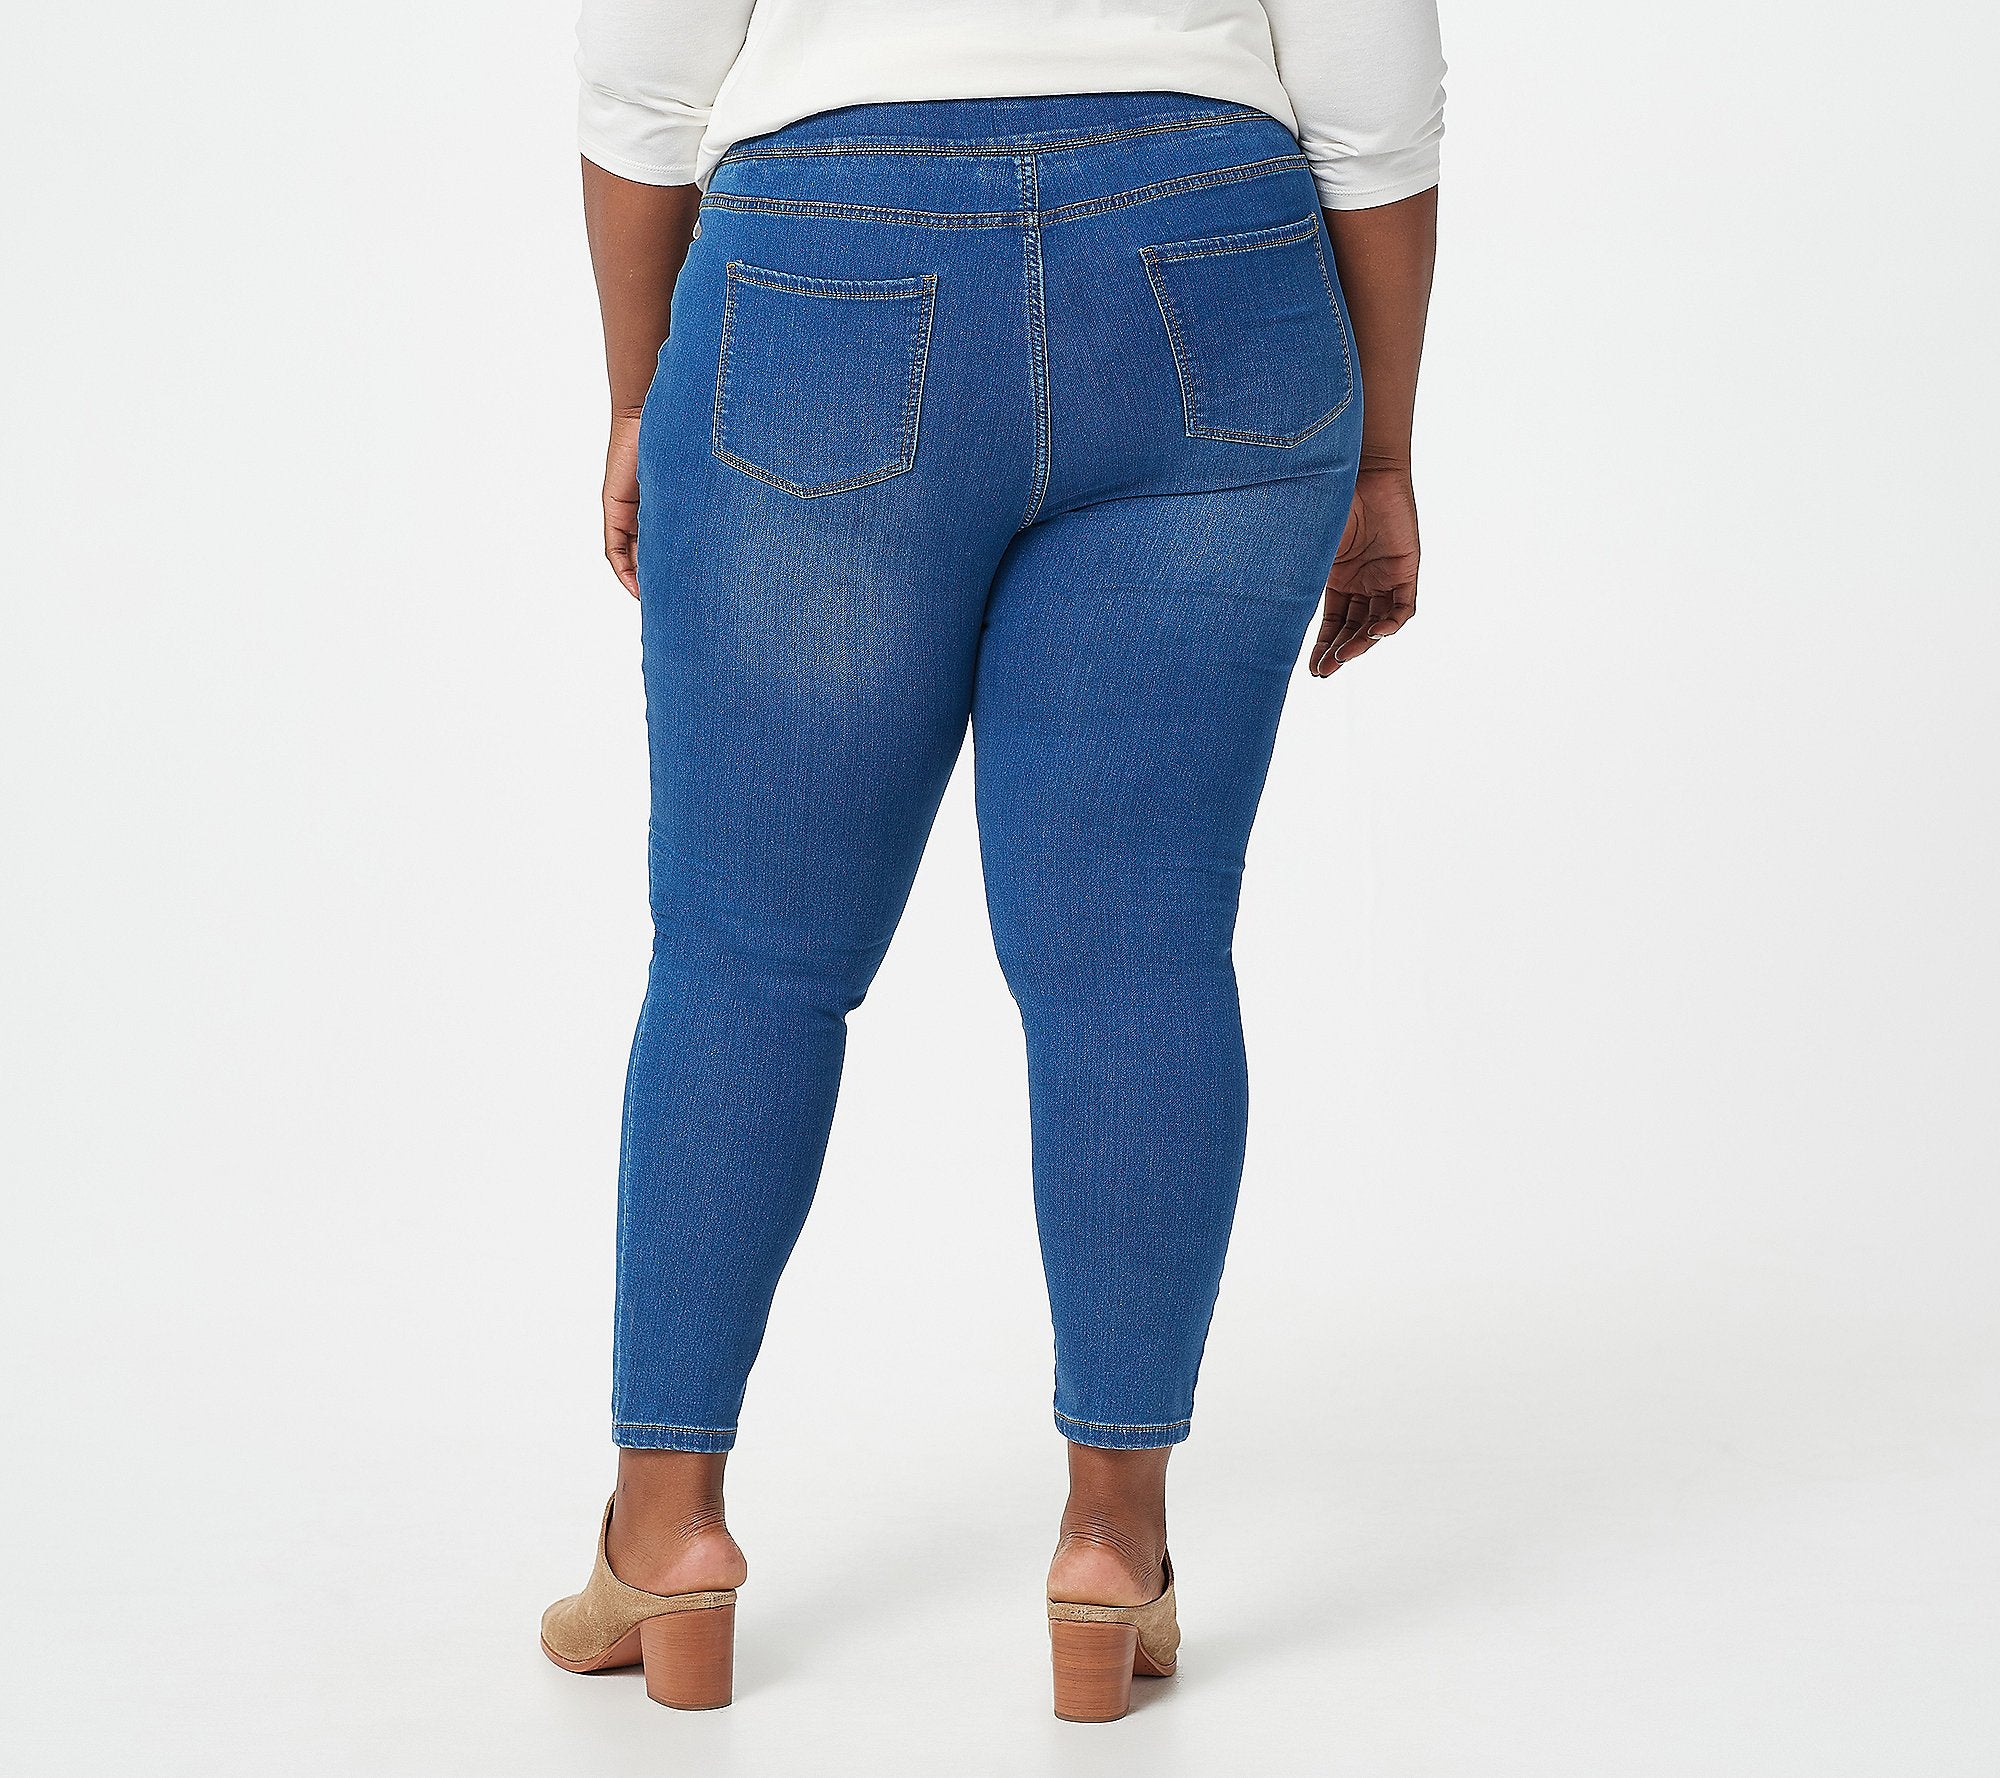 Denim & Co. Comfy Knit Pull-On Jeggings with Stud Detail